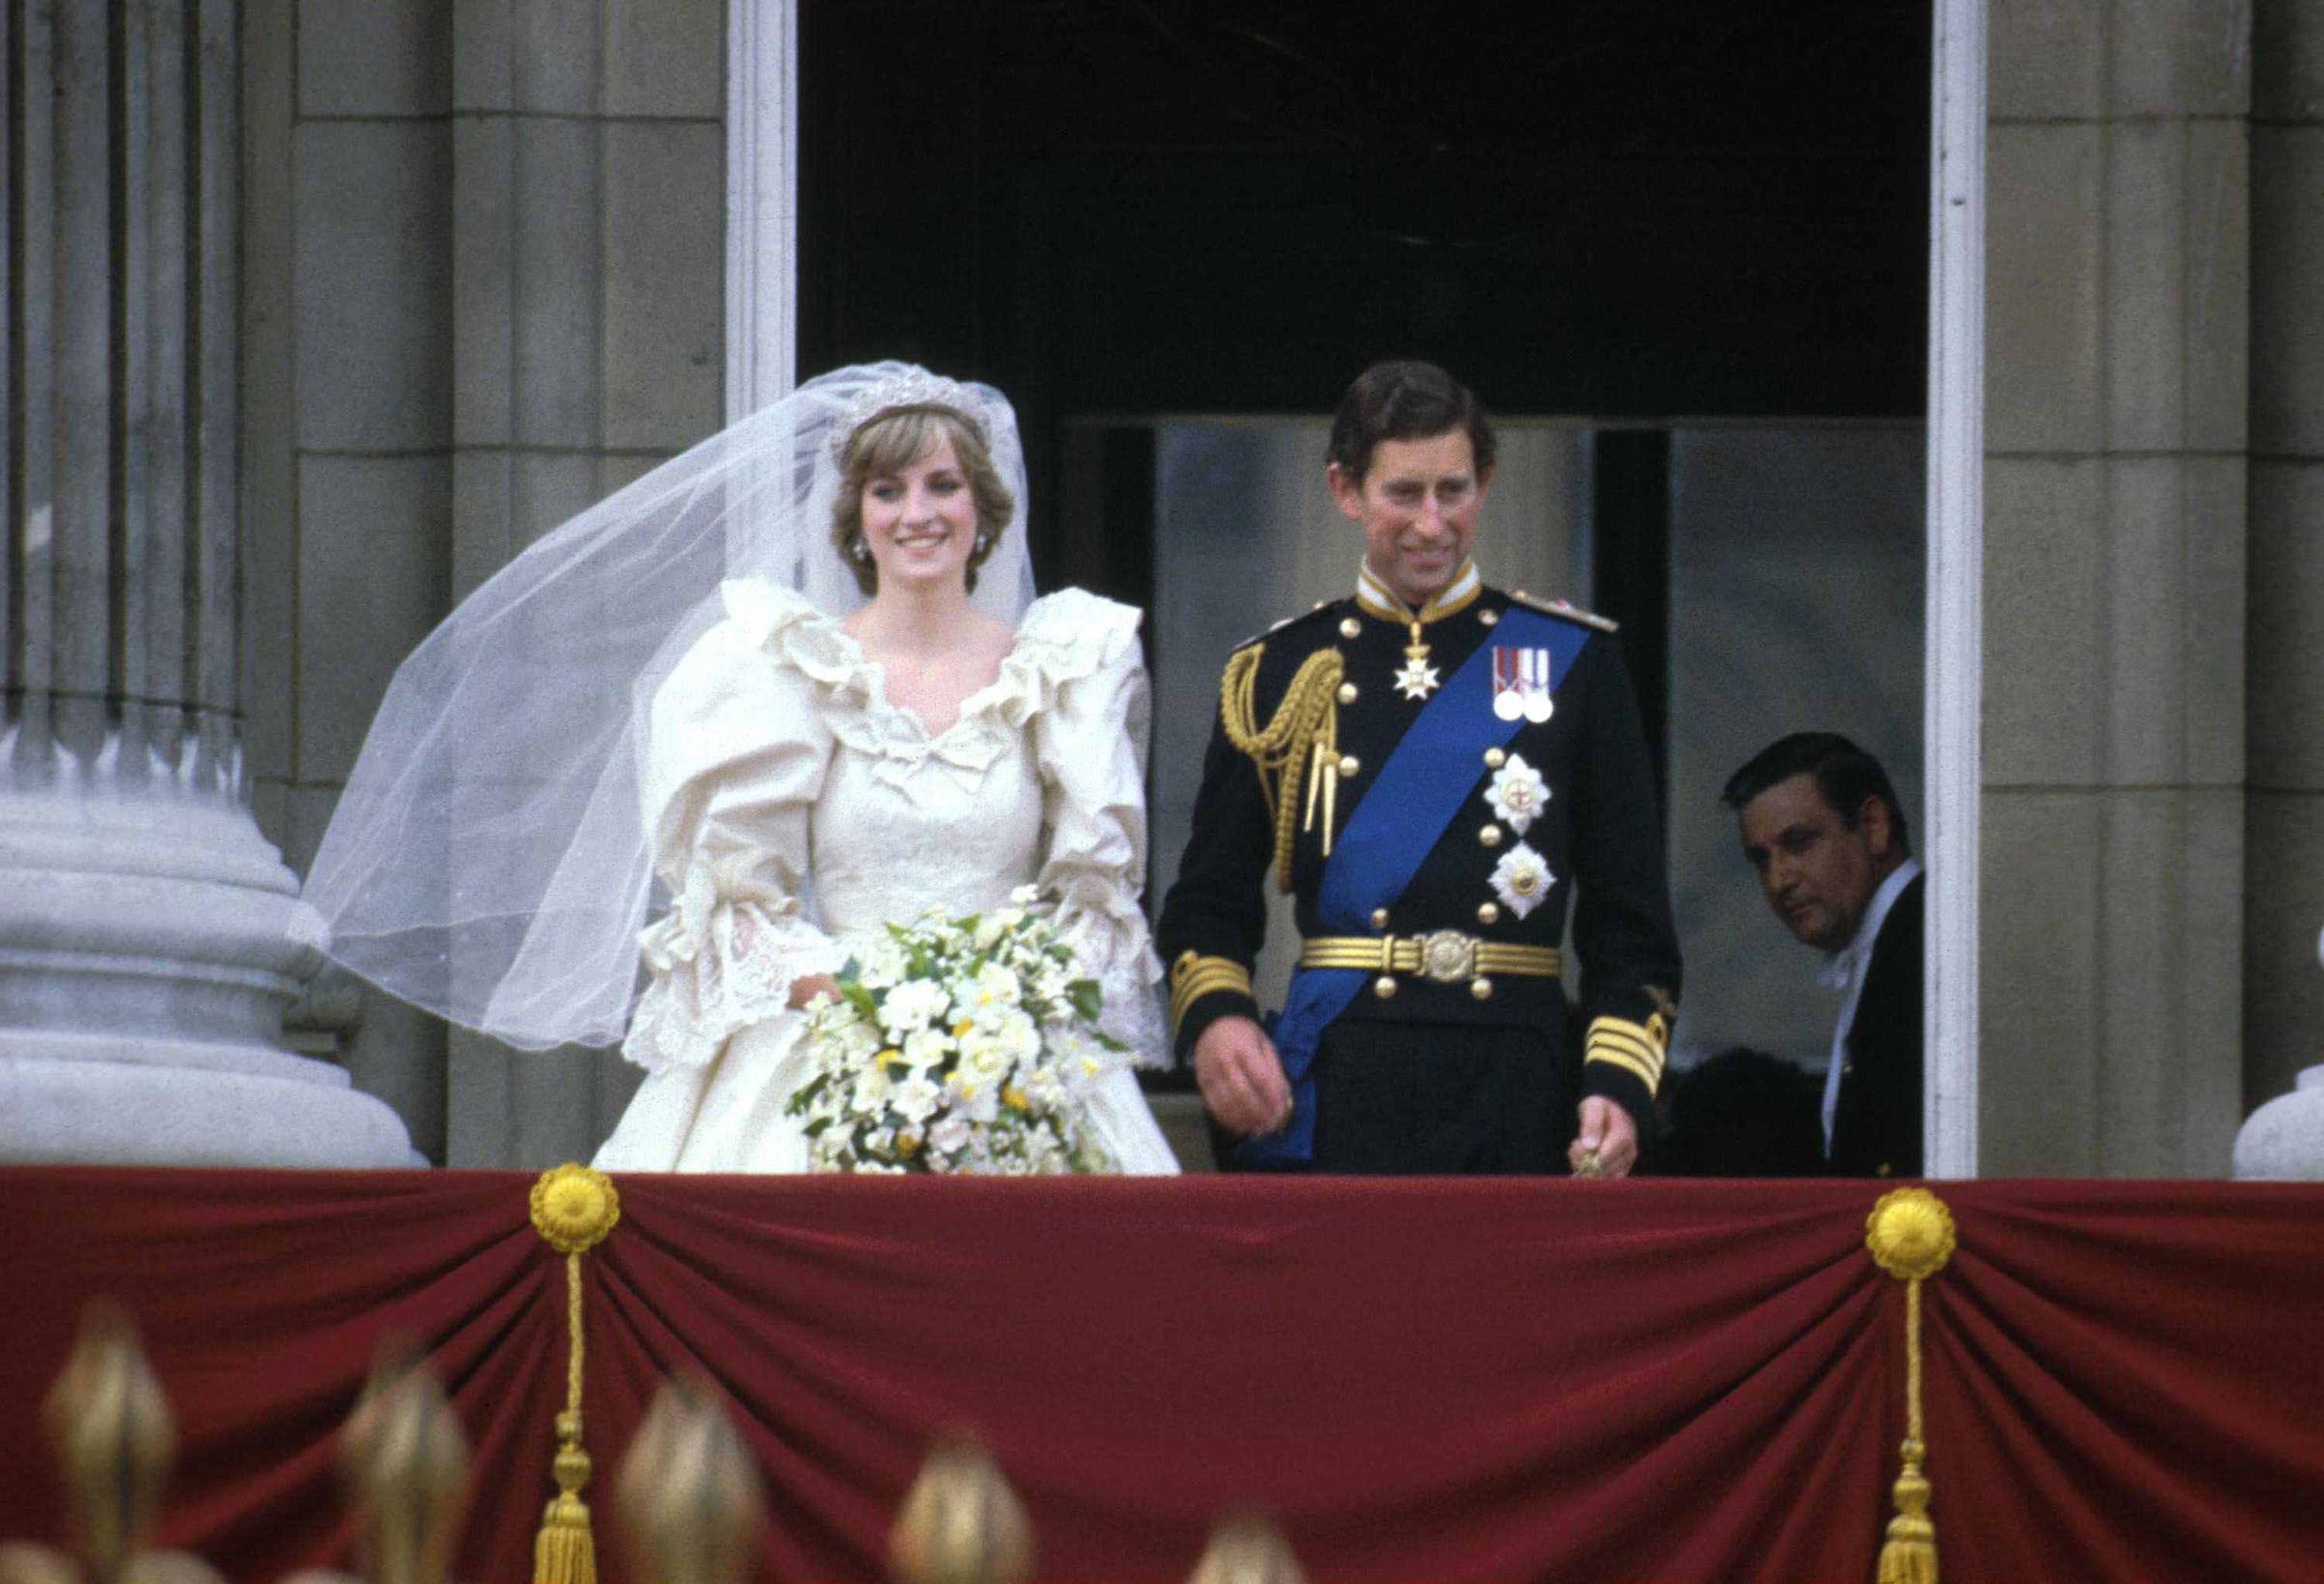 Princess Diana's Wedding - Charles and Diana's Most Glamorous Wedding Day  Details